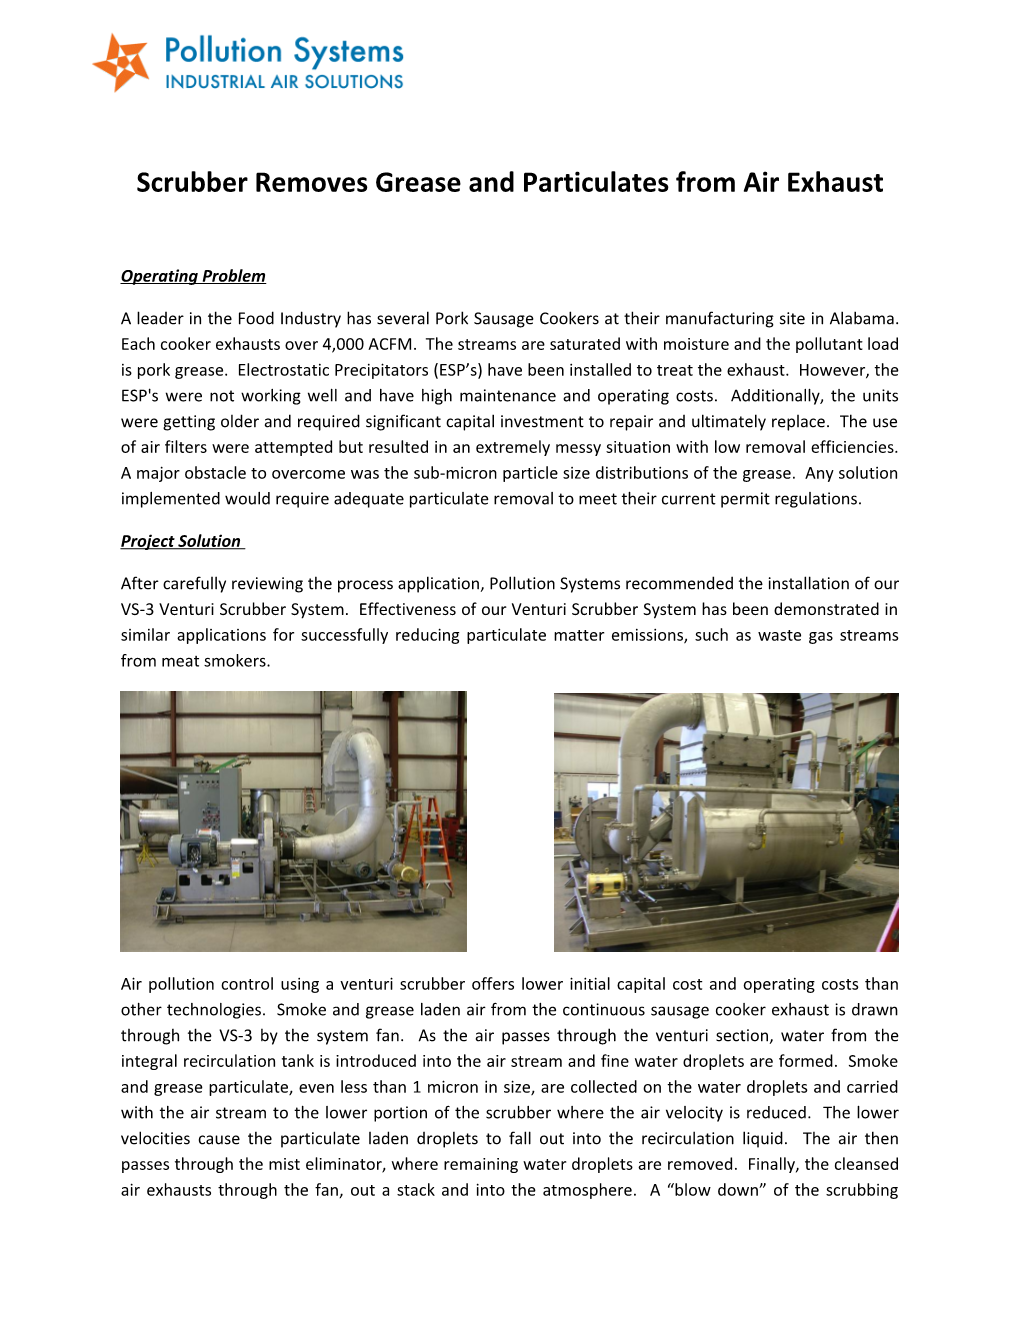 Scrubber Removes Grease and Particulates from Air Exhaust